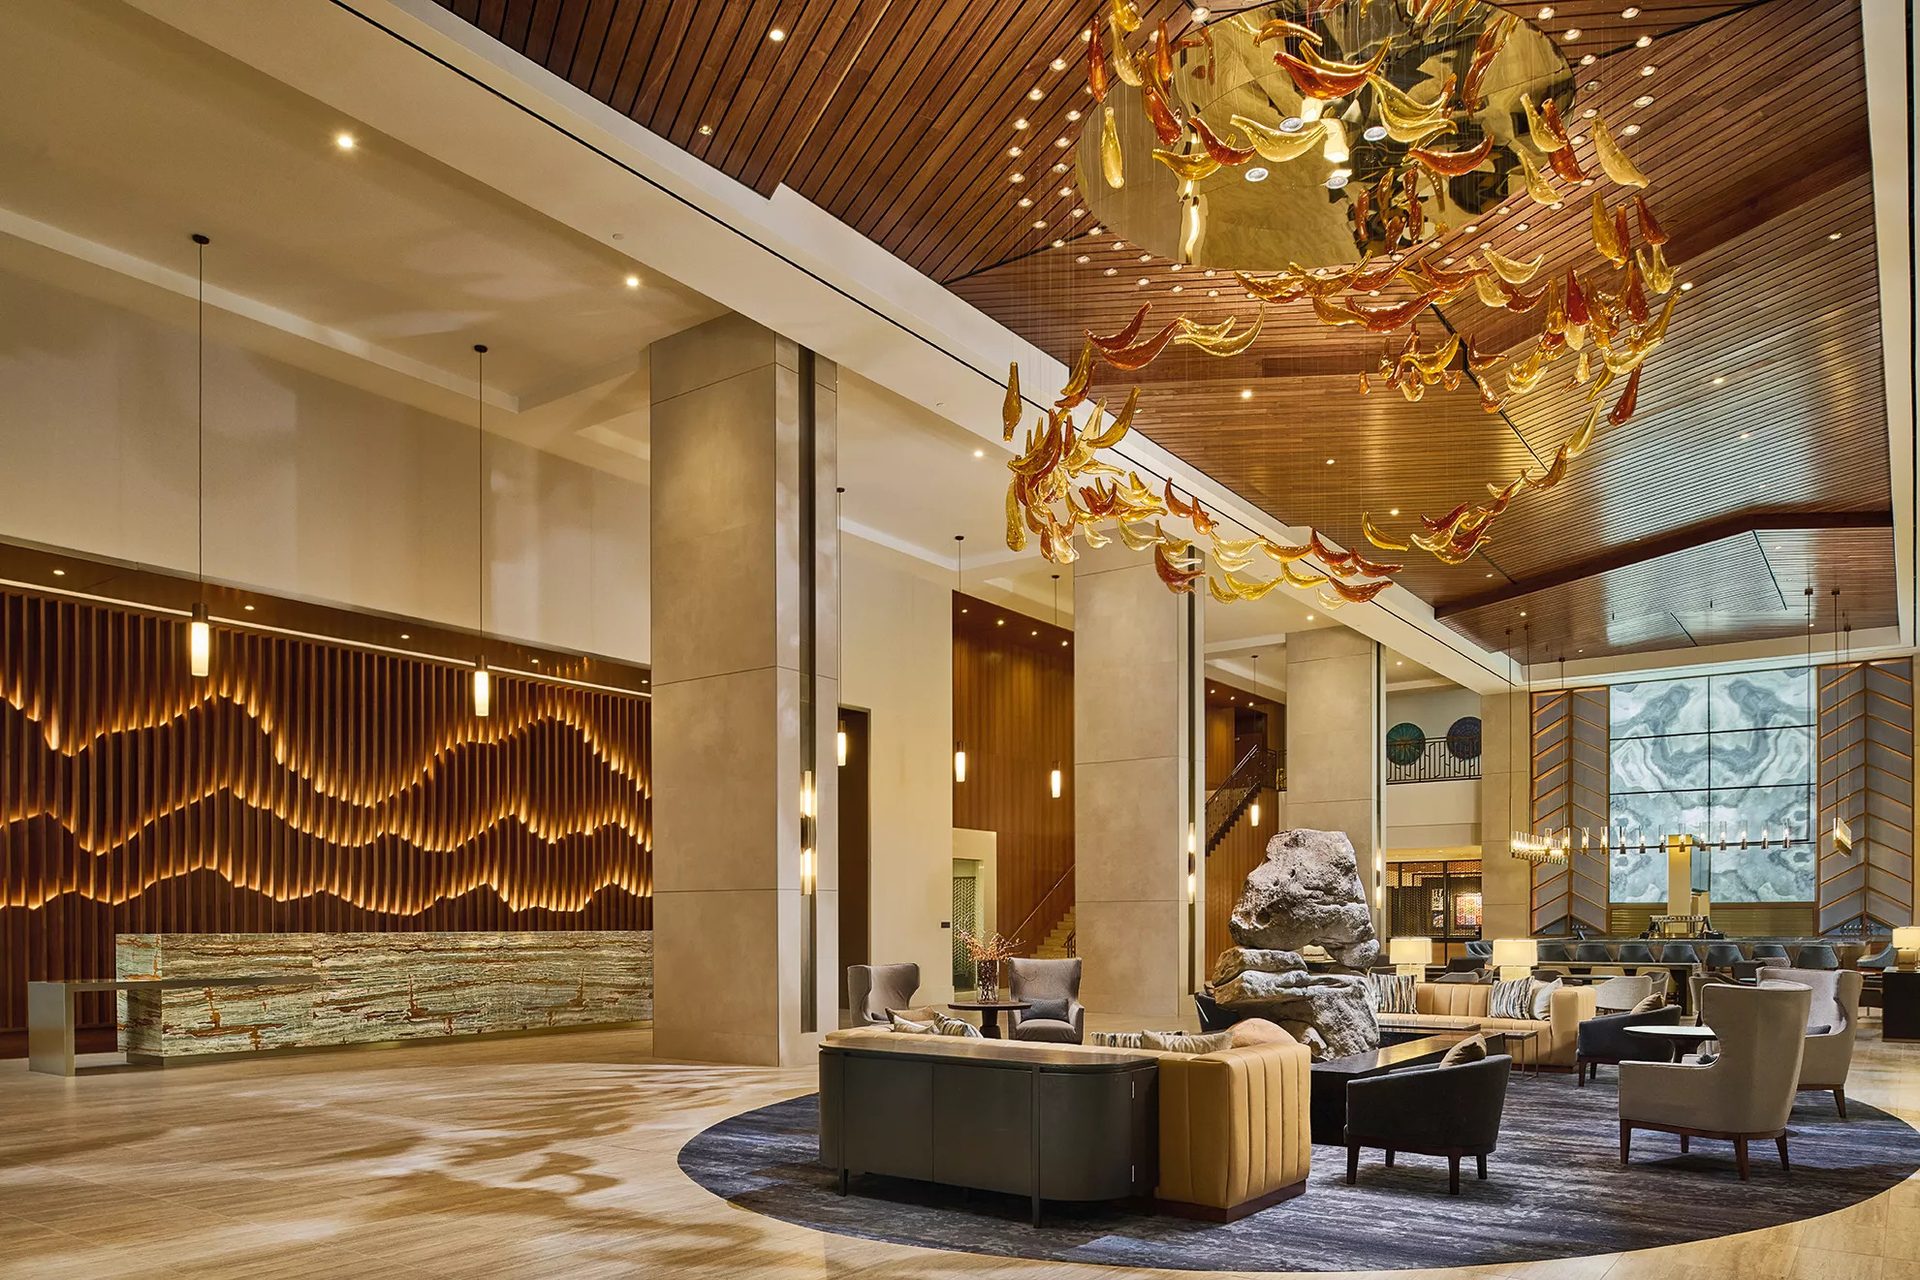 Interior ceiling design of Cherokee Casino and Convention Center